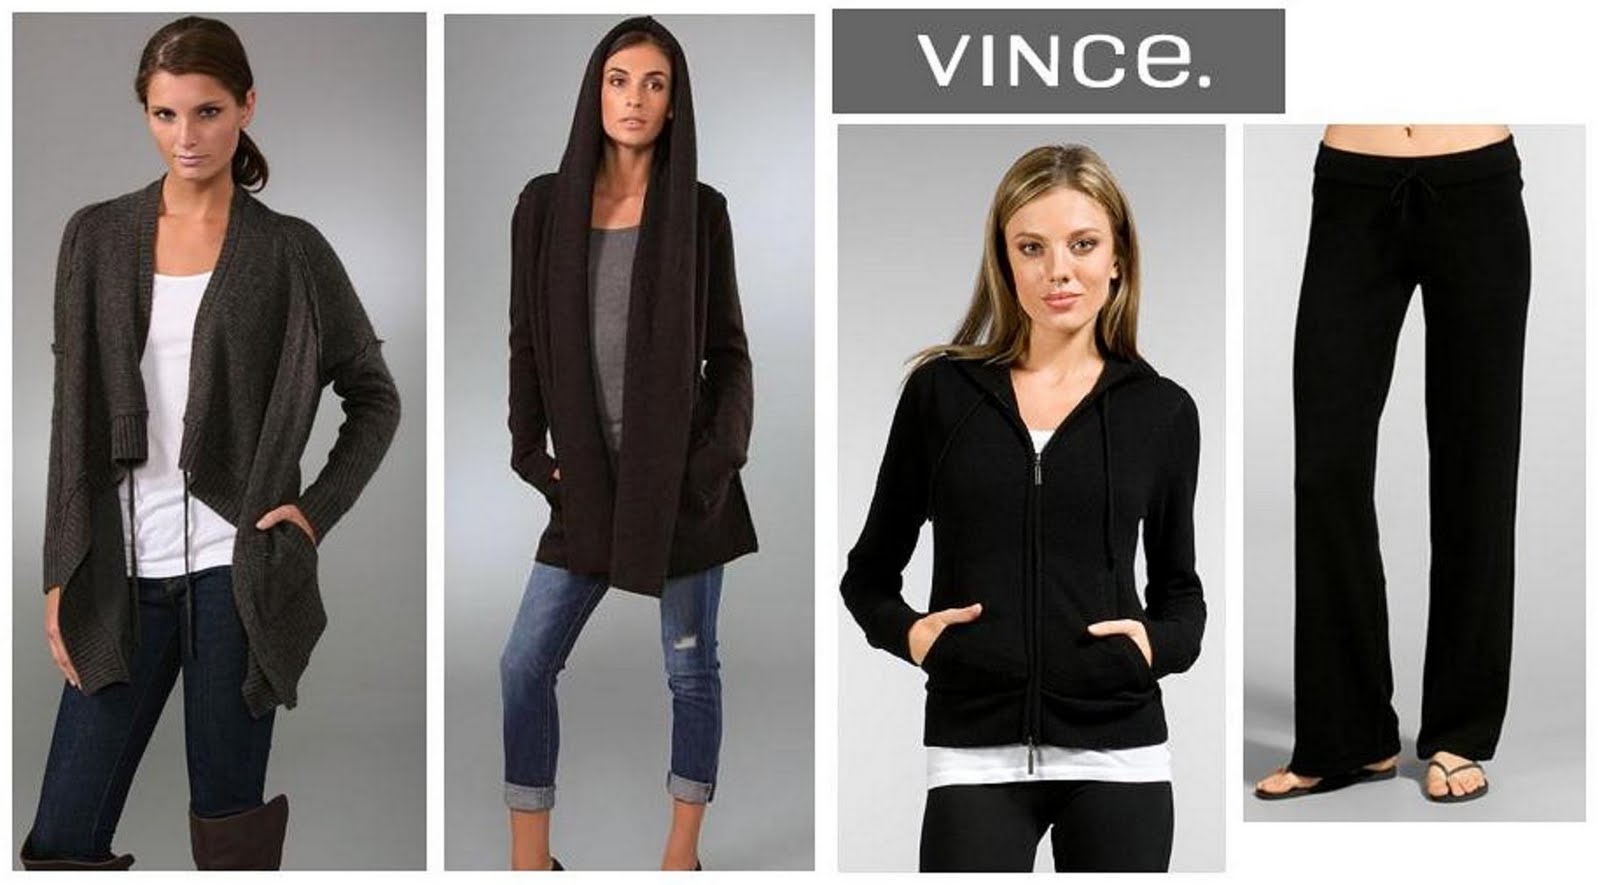 Therapy Clothing Pasadena: Get cozy in VINCE!